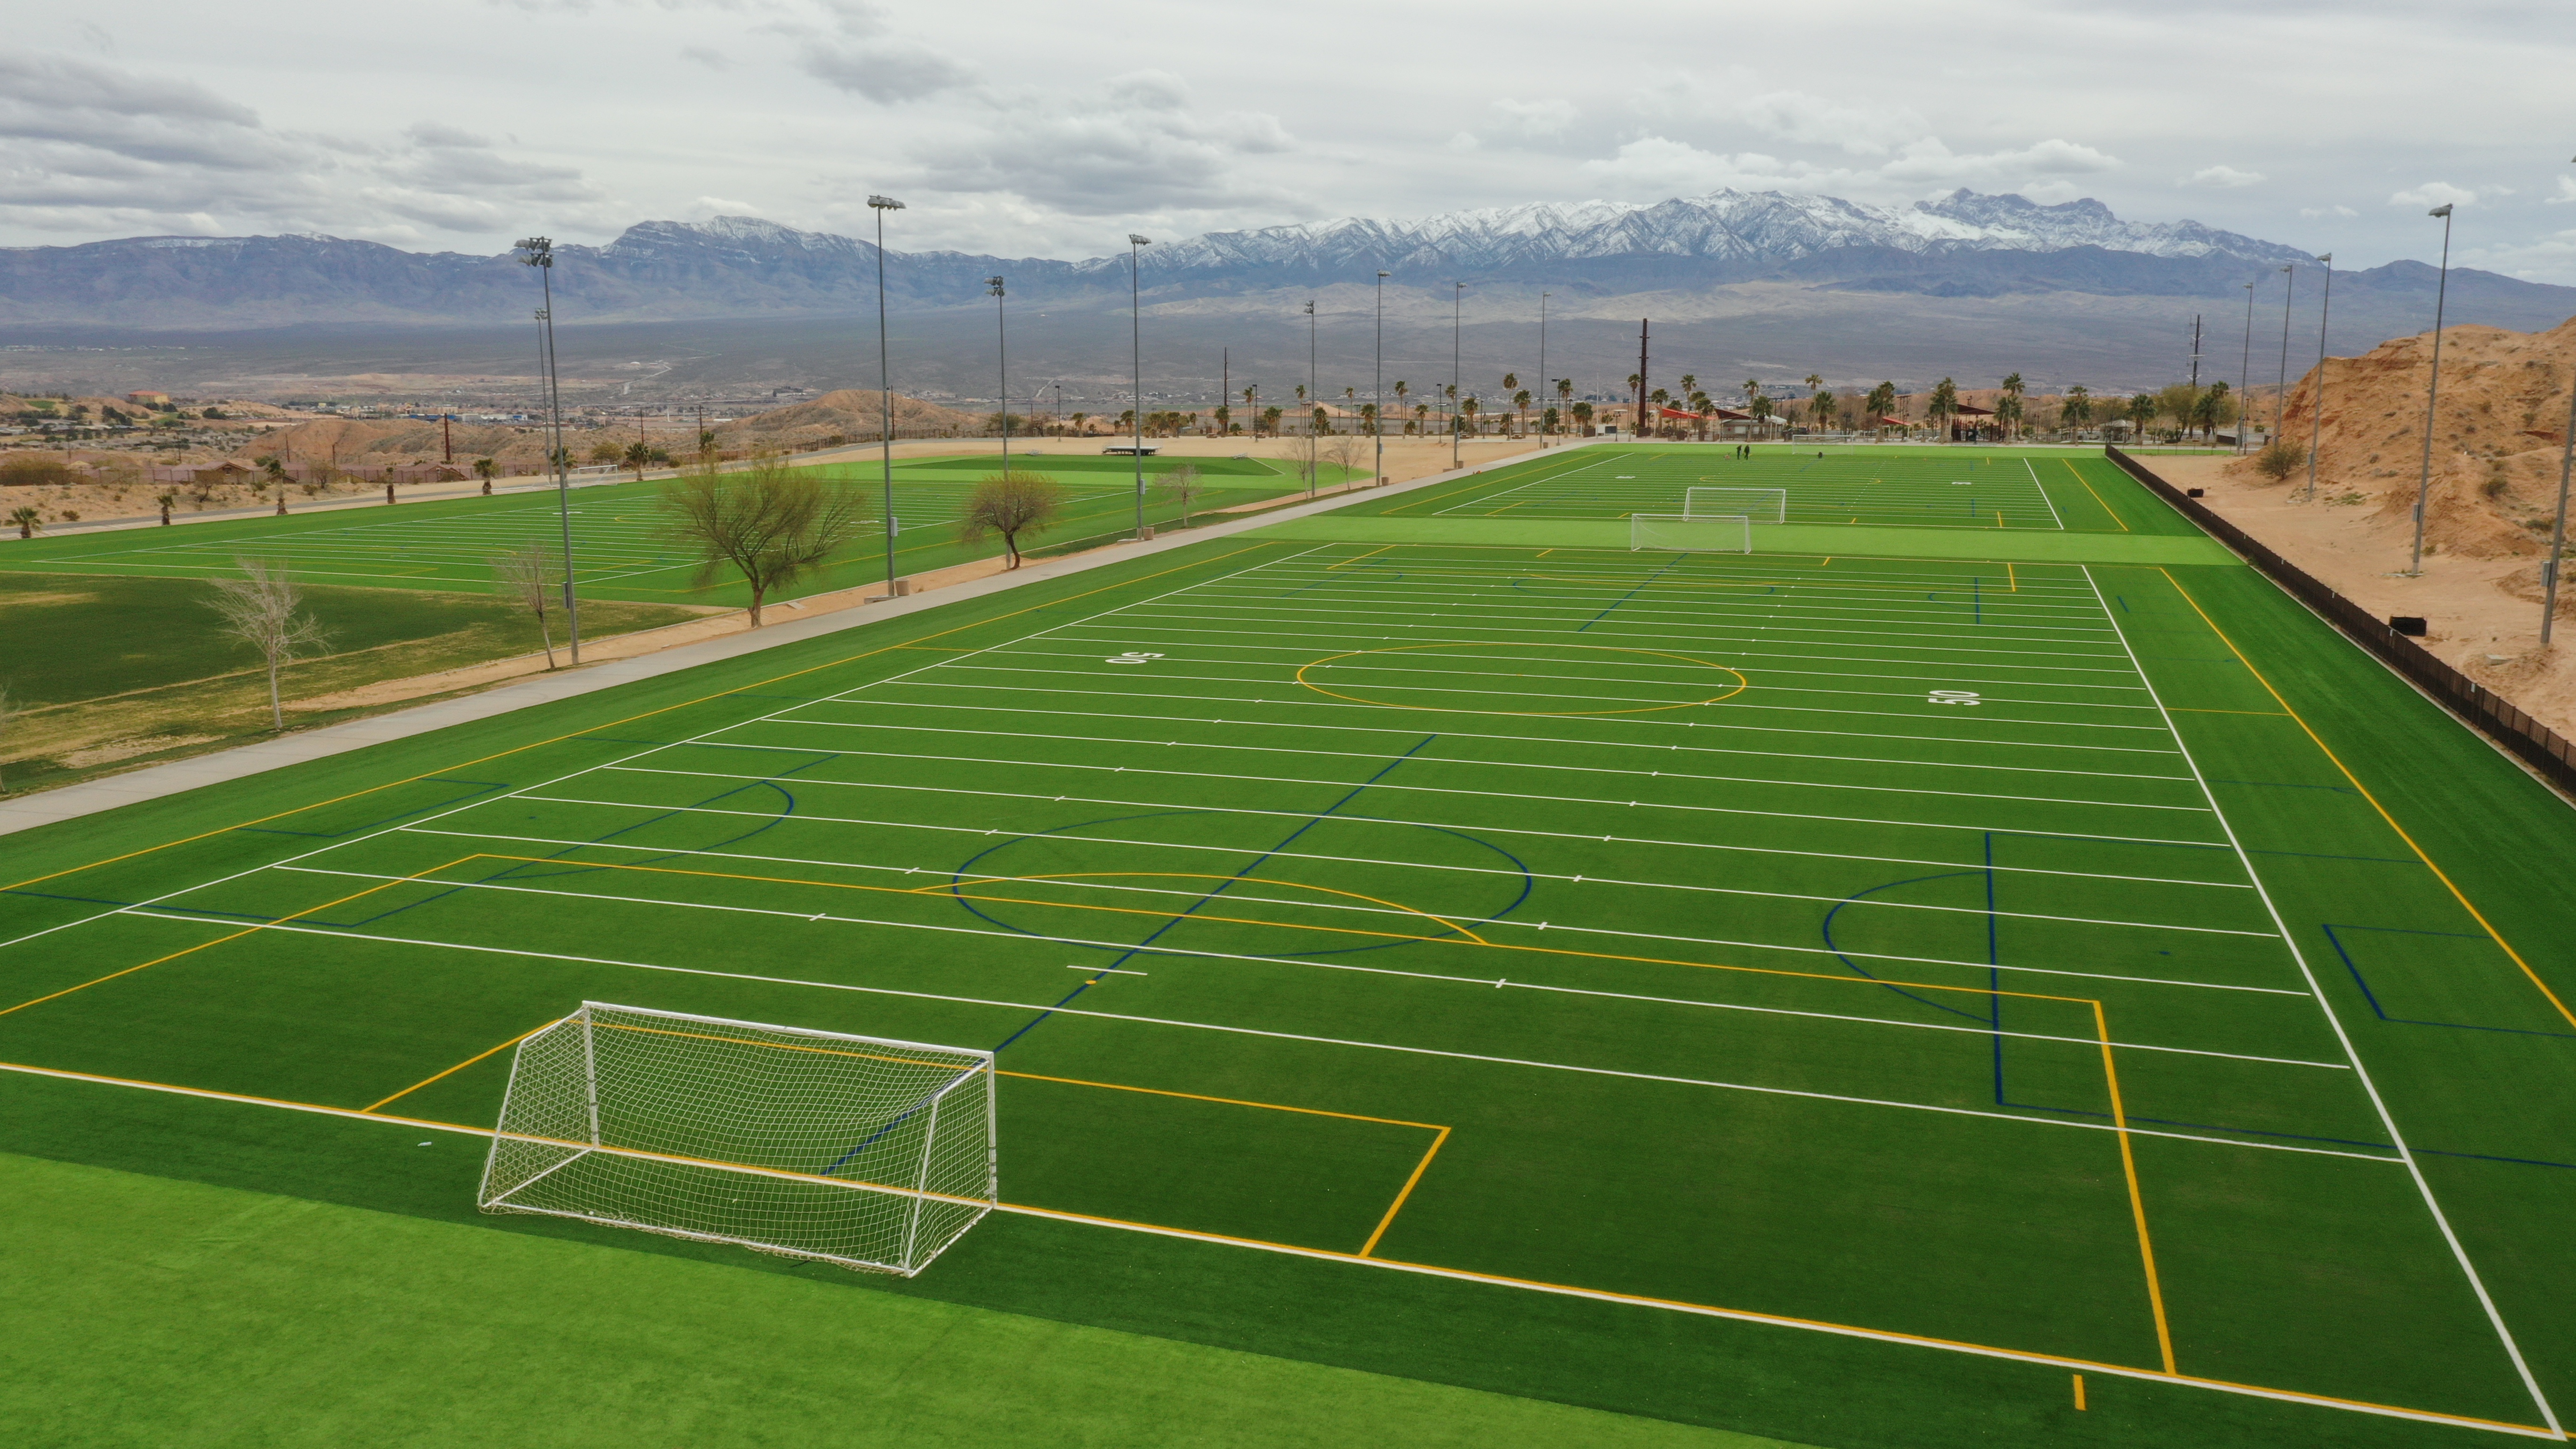 Mesquite Regional Sports & Event Complex features 3 Matrix Helix® synthetic turf fields installed by Hellas - Mesquite, NV